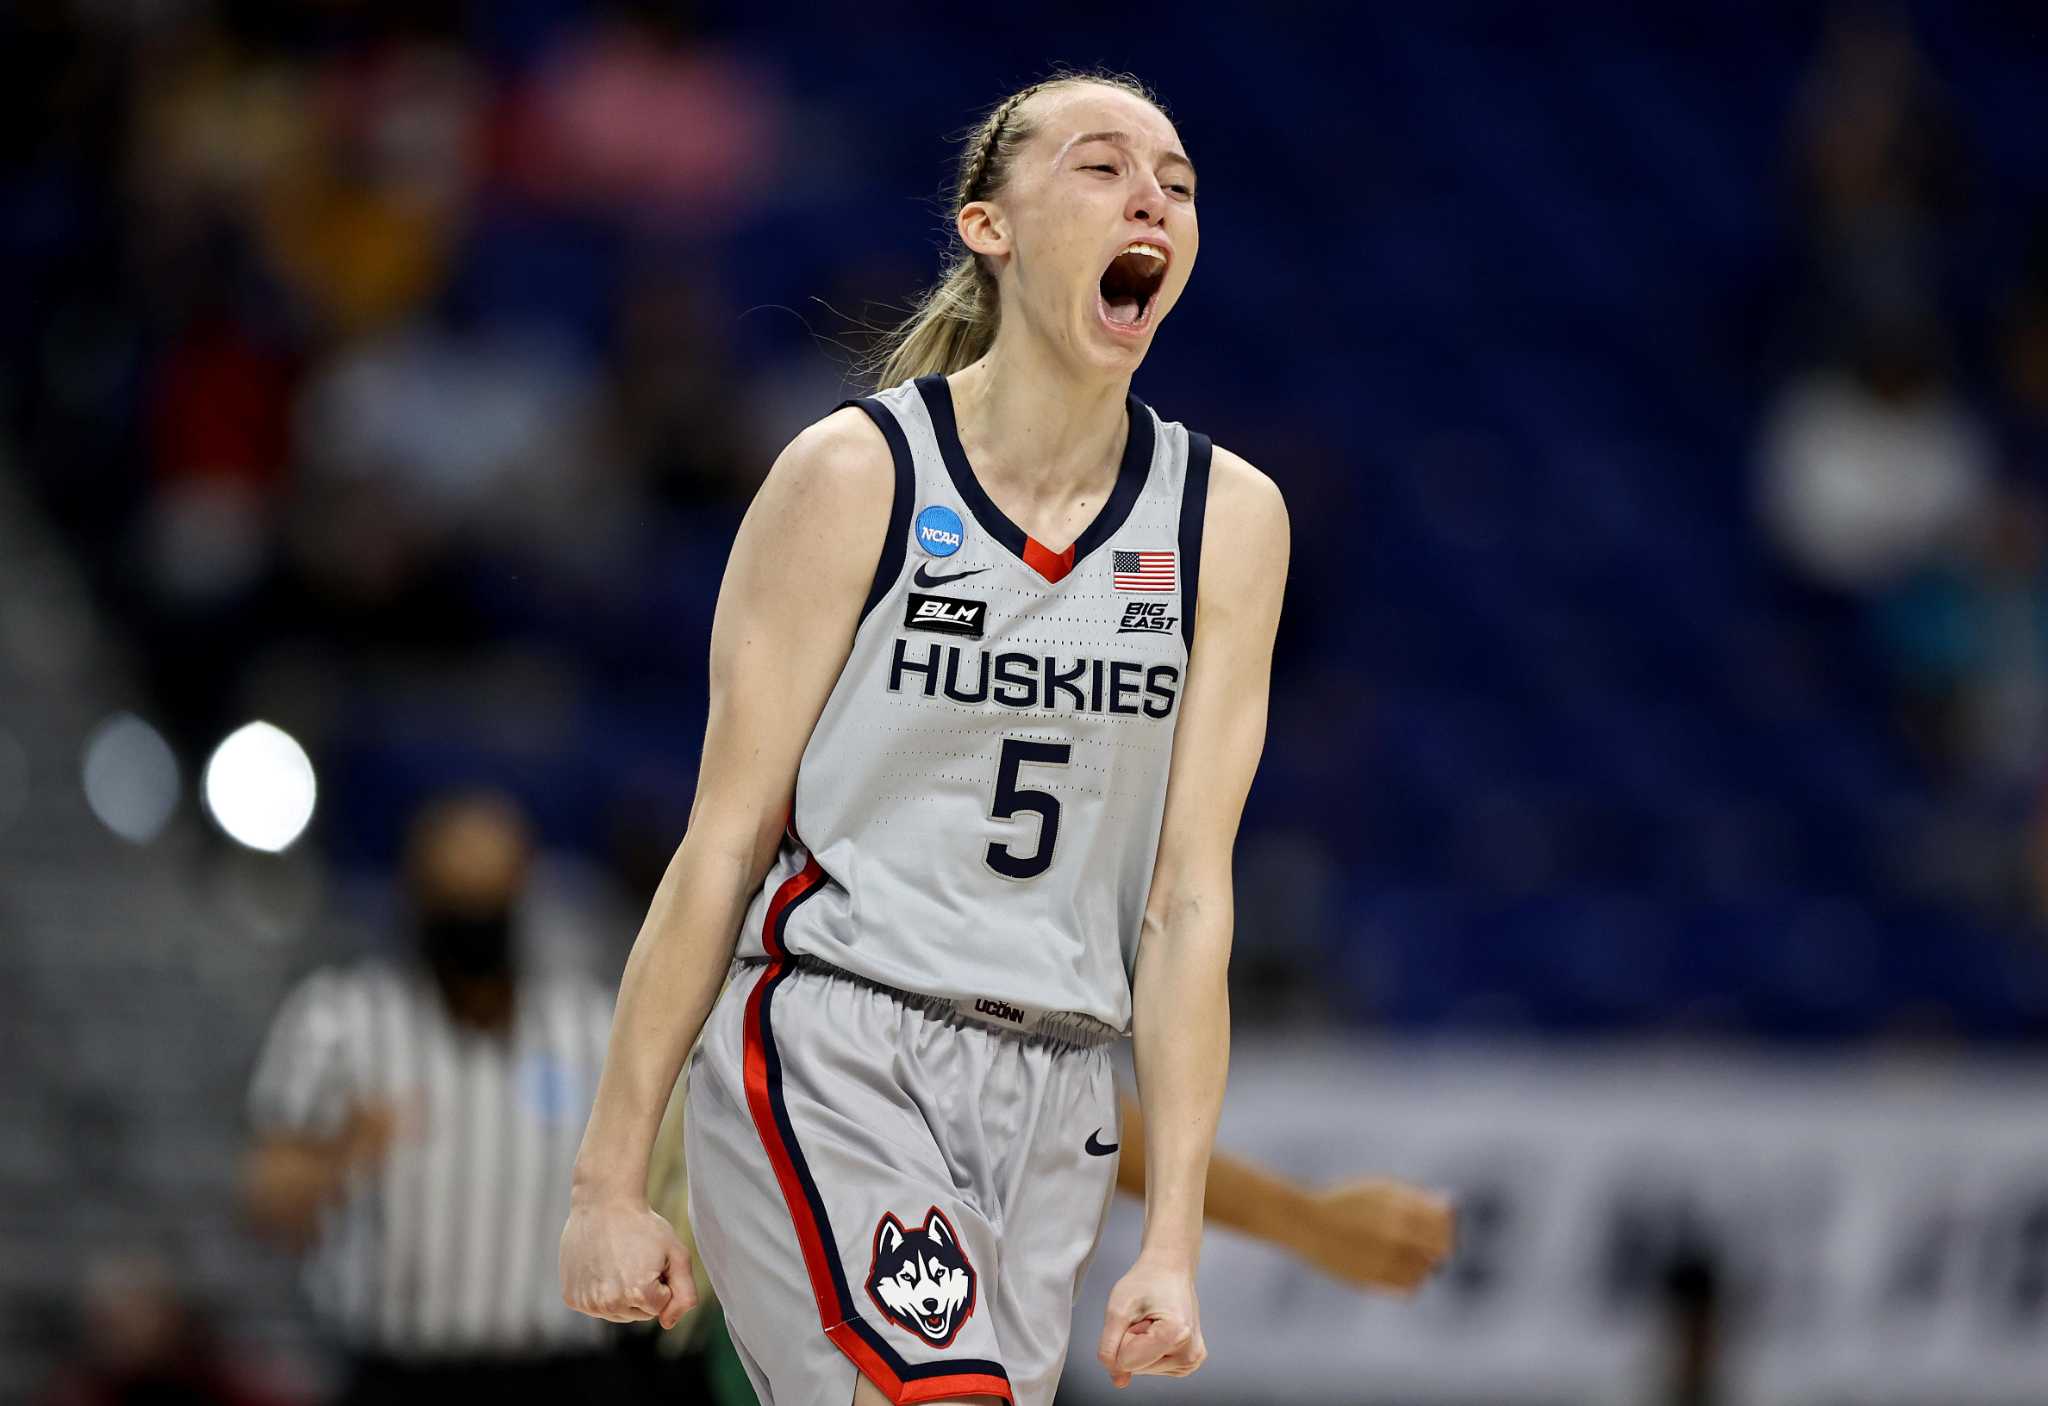 UConn's Paige Bueckers first freshman named AP Player of the Year